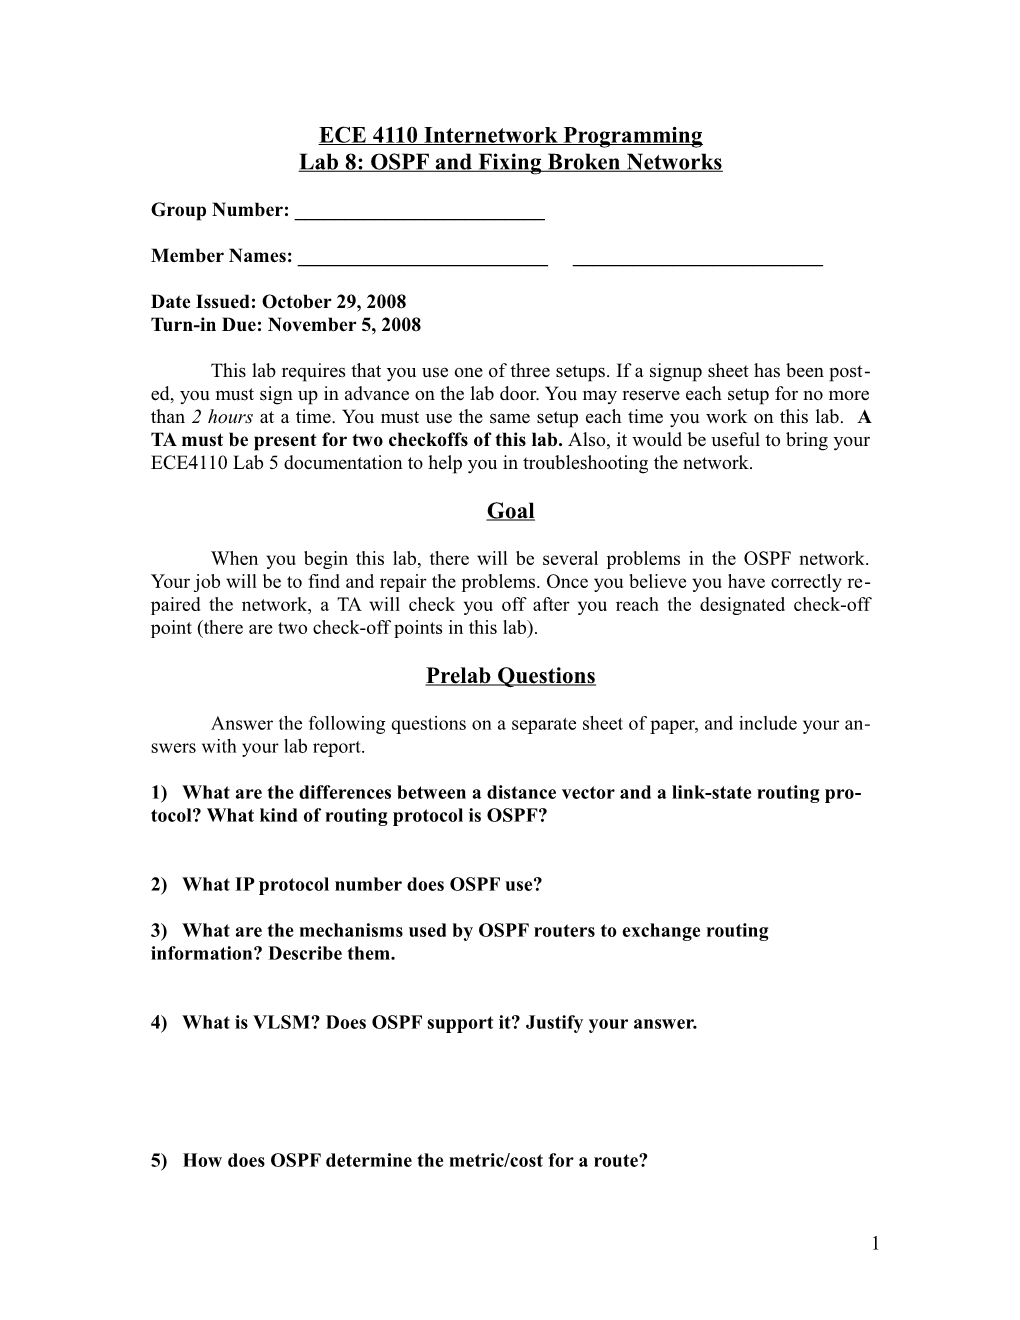 Lab 8: OSPF and Fixing Broken Networks